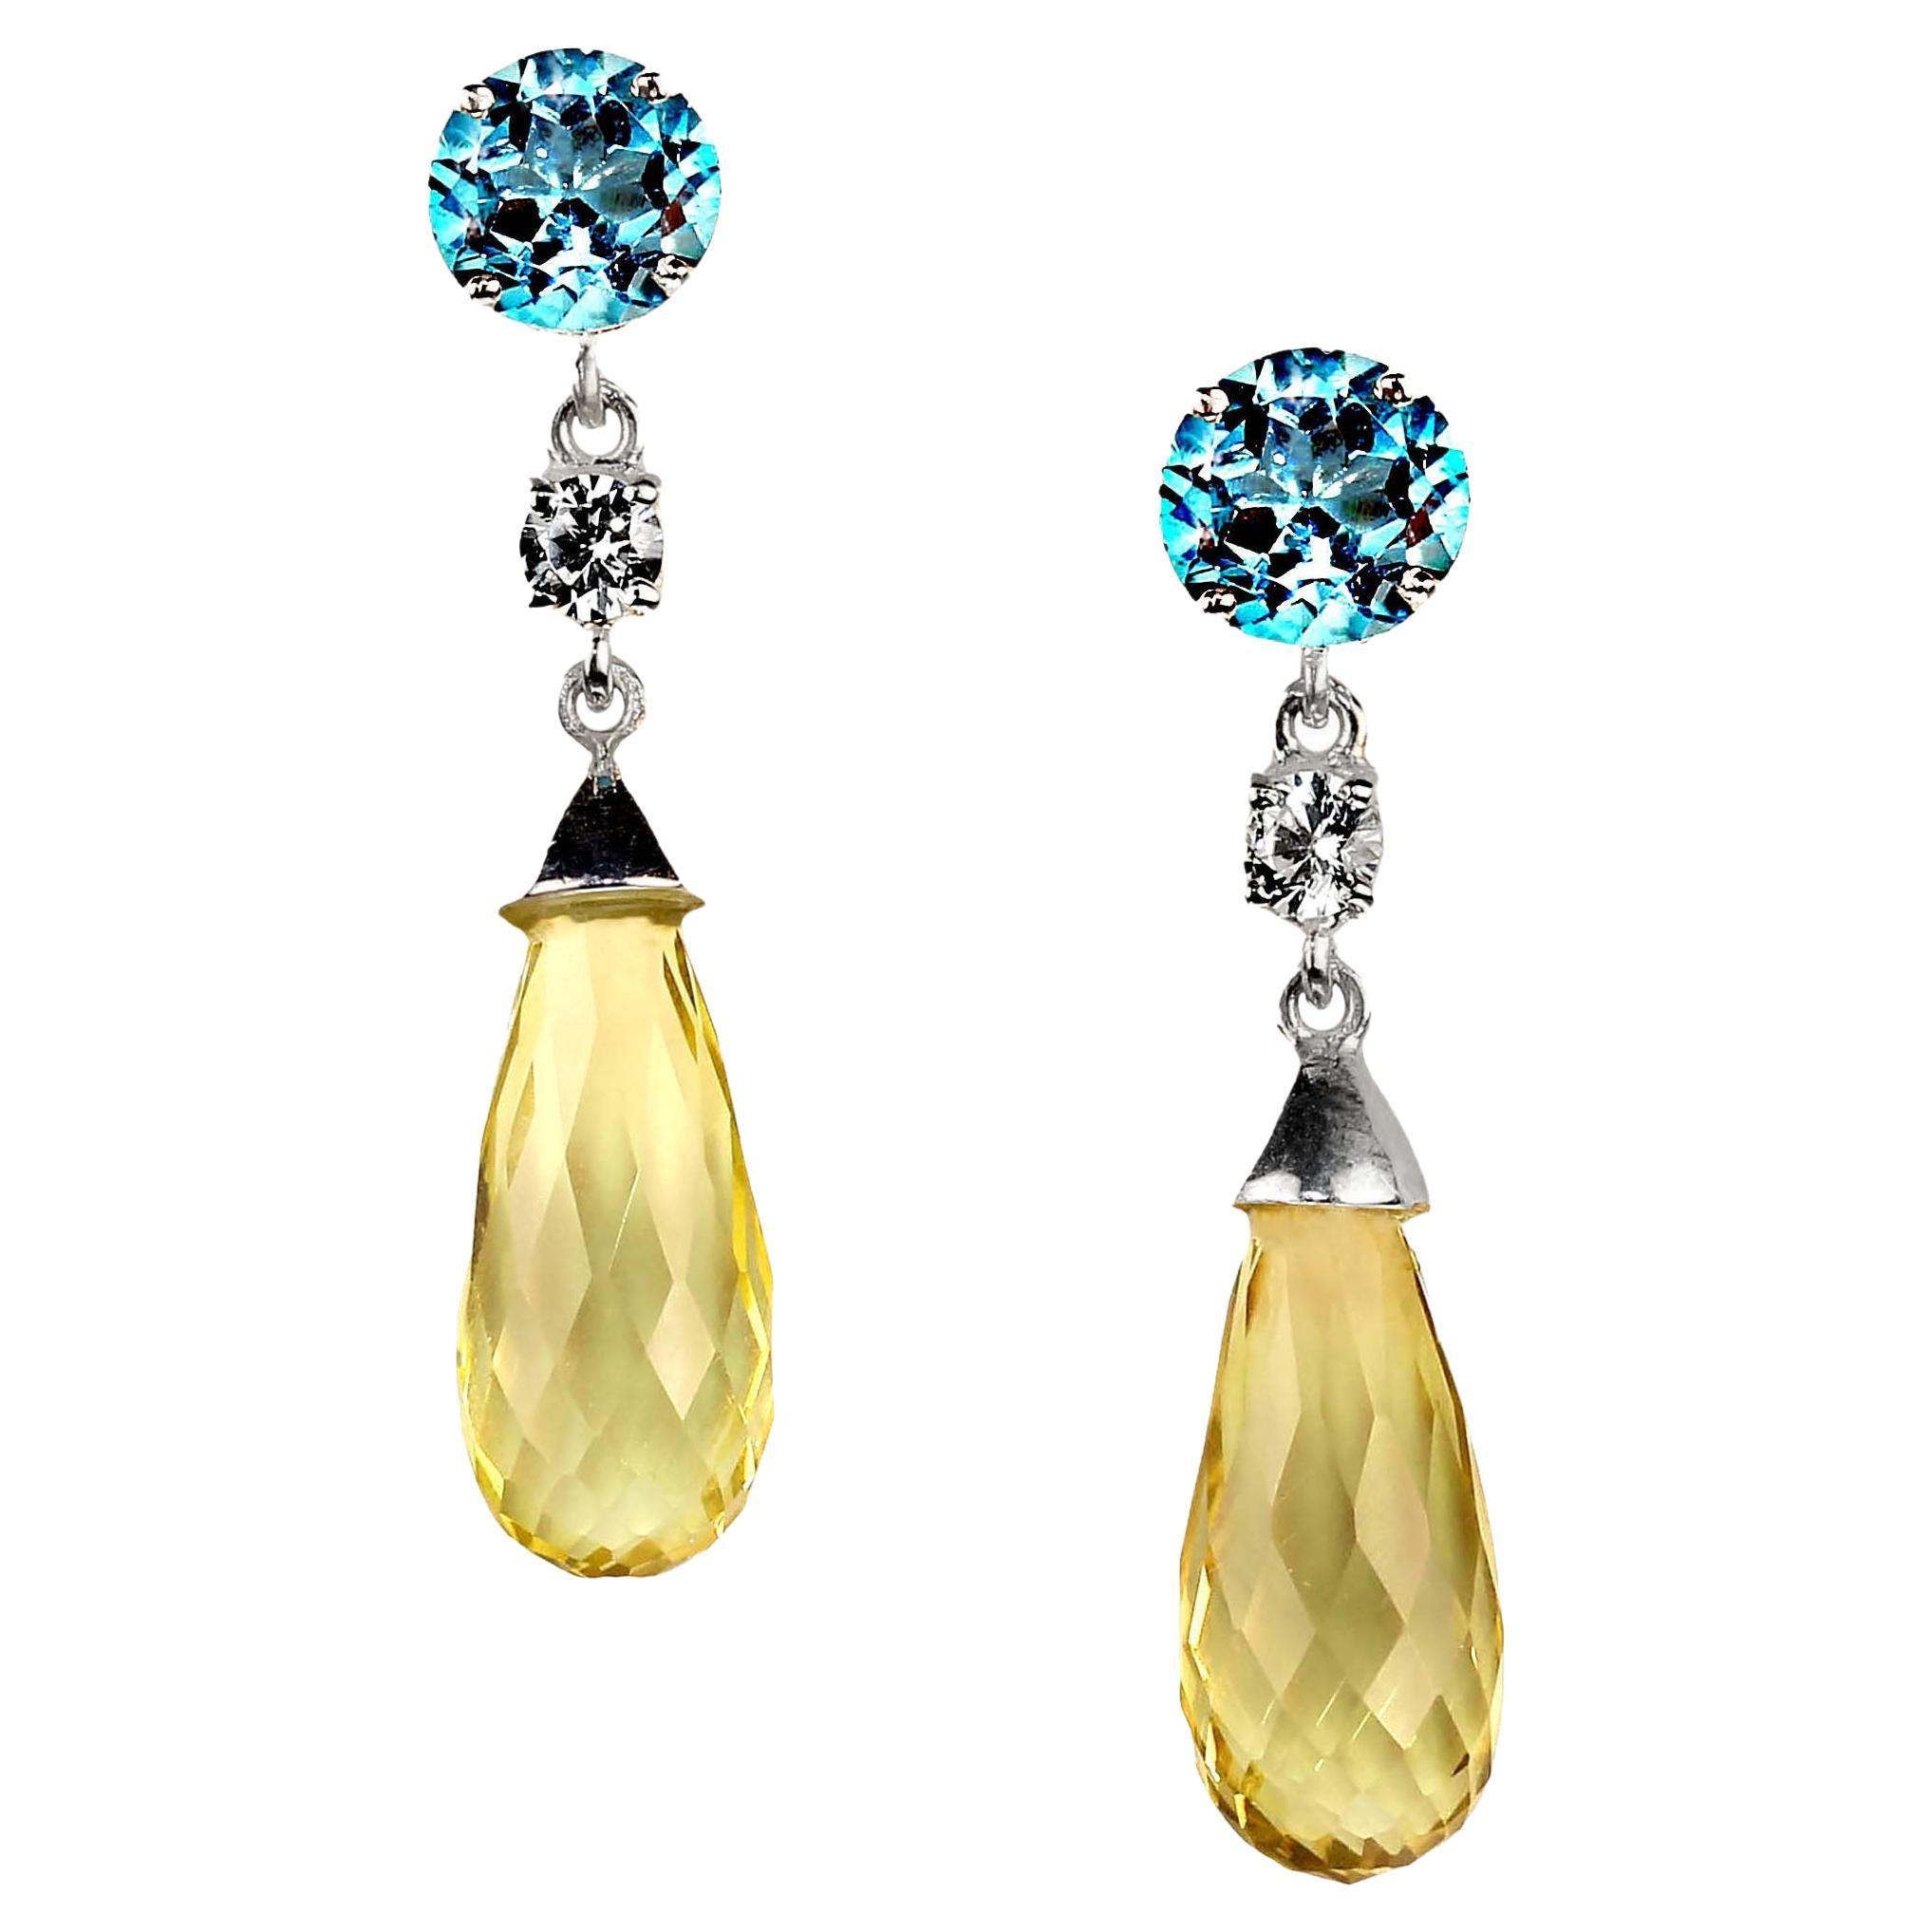 Sparkling dangle earrings of Blue Topaz and Lemon Quartz.  These lovely earrings feature round Blue Topaz of 3.44ct and Lemon Quartz briolettes of 13.35ct.  These are accented with 0.59ct of genuine zircon.  The setting is Sterling Silver with post